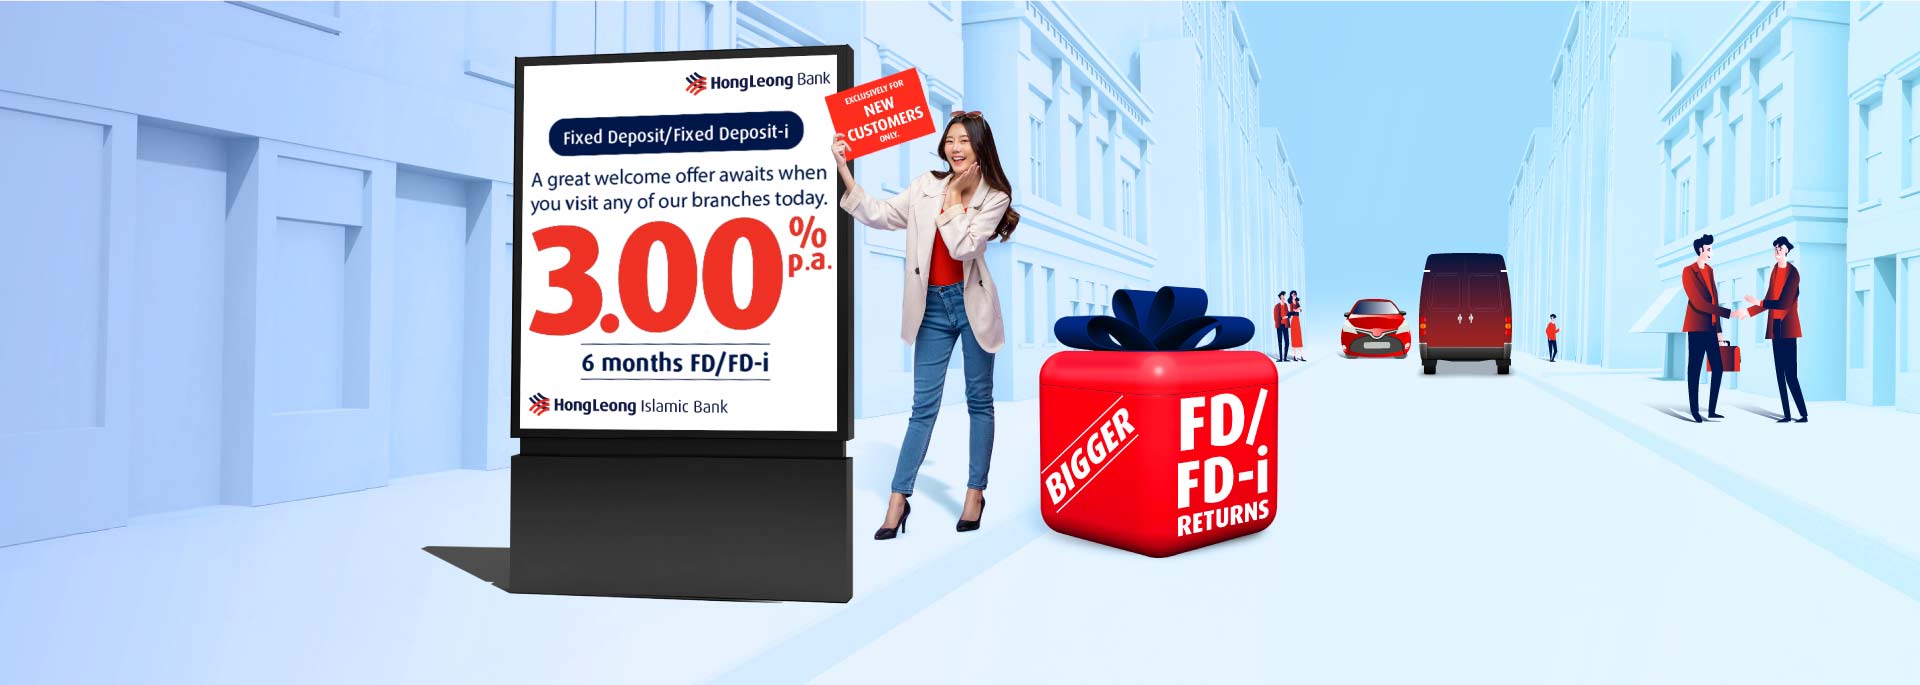 6 Month Fd Fd I Promotion For New Customers Hong Leong Bank